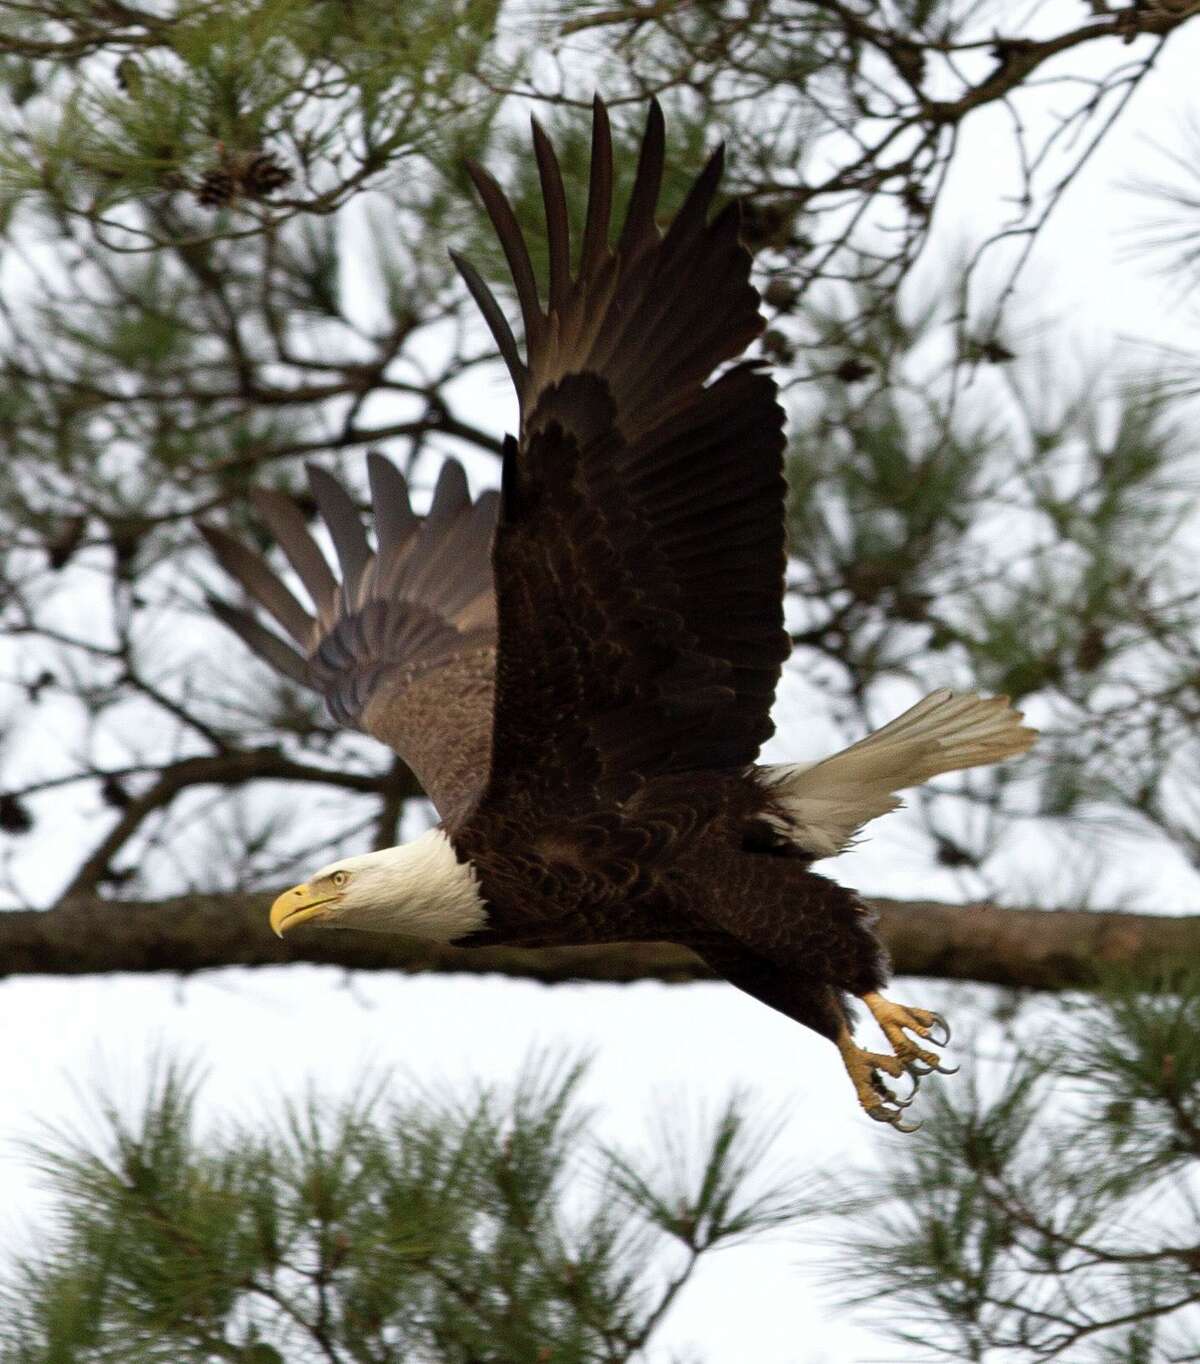 Local residents who oppose a replat plan for Mitchell Island claim the bald eagle family uses Mitchell Island for hunting, hanging out and other eagle fun. A bald eagle flies near its nest, Friday, Feb. 2, 2018, in The Woodlands.